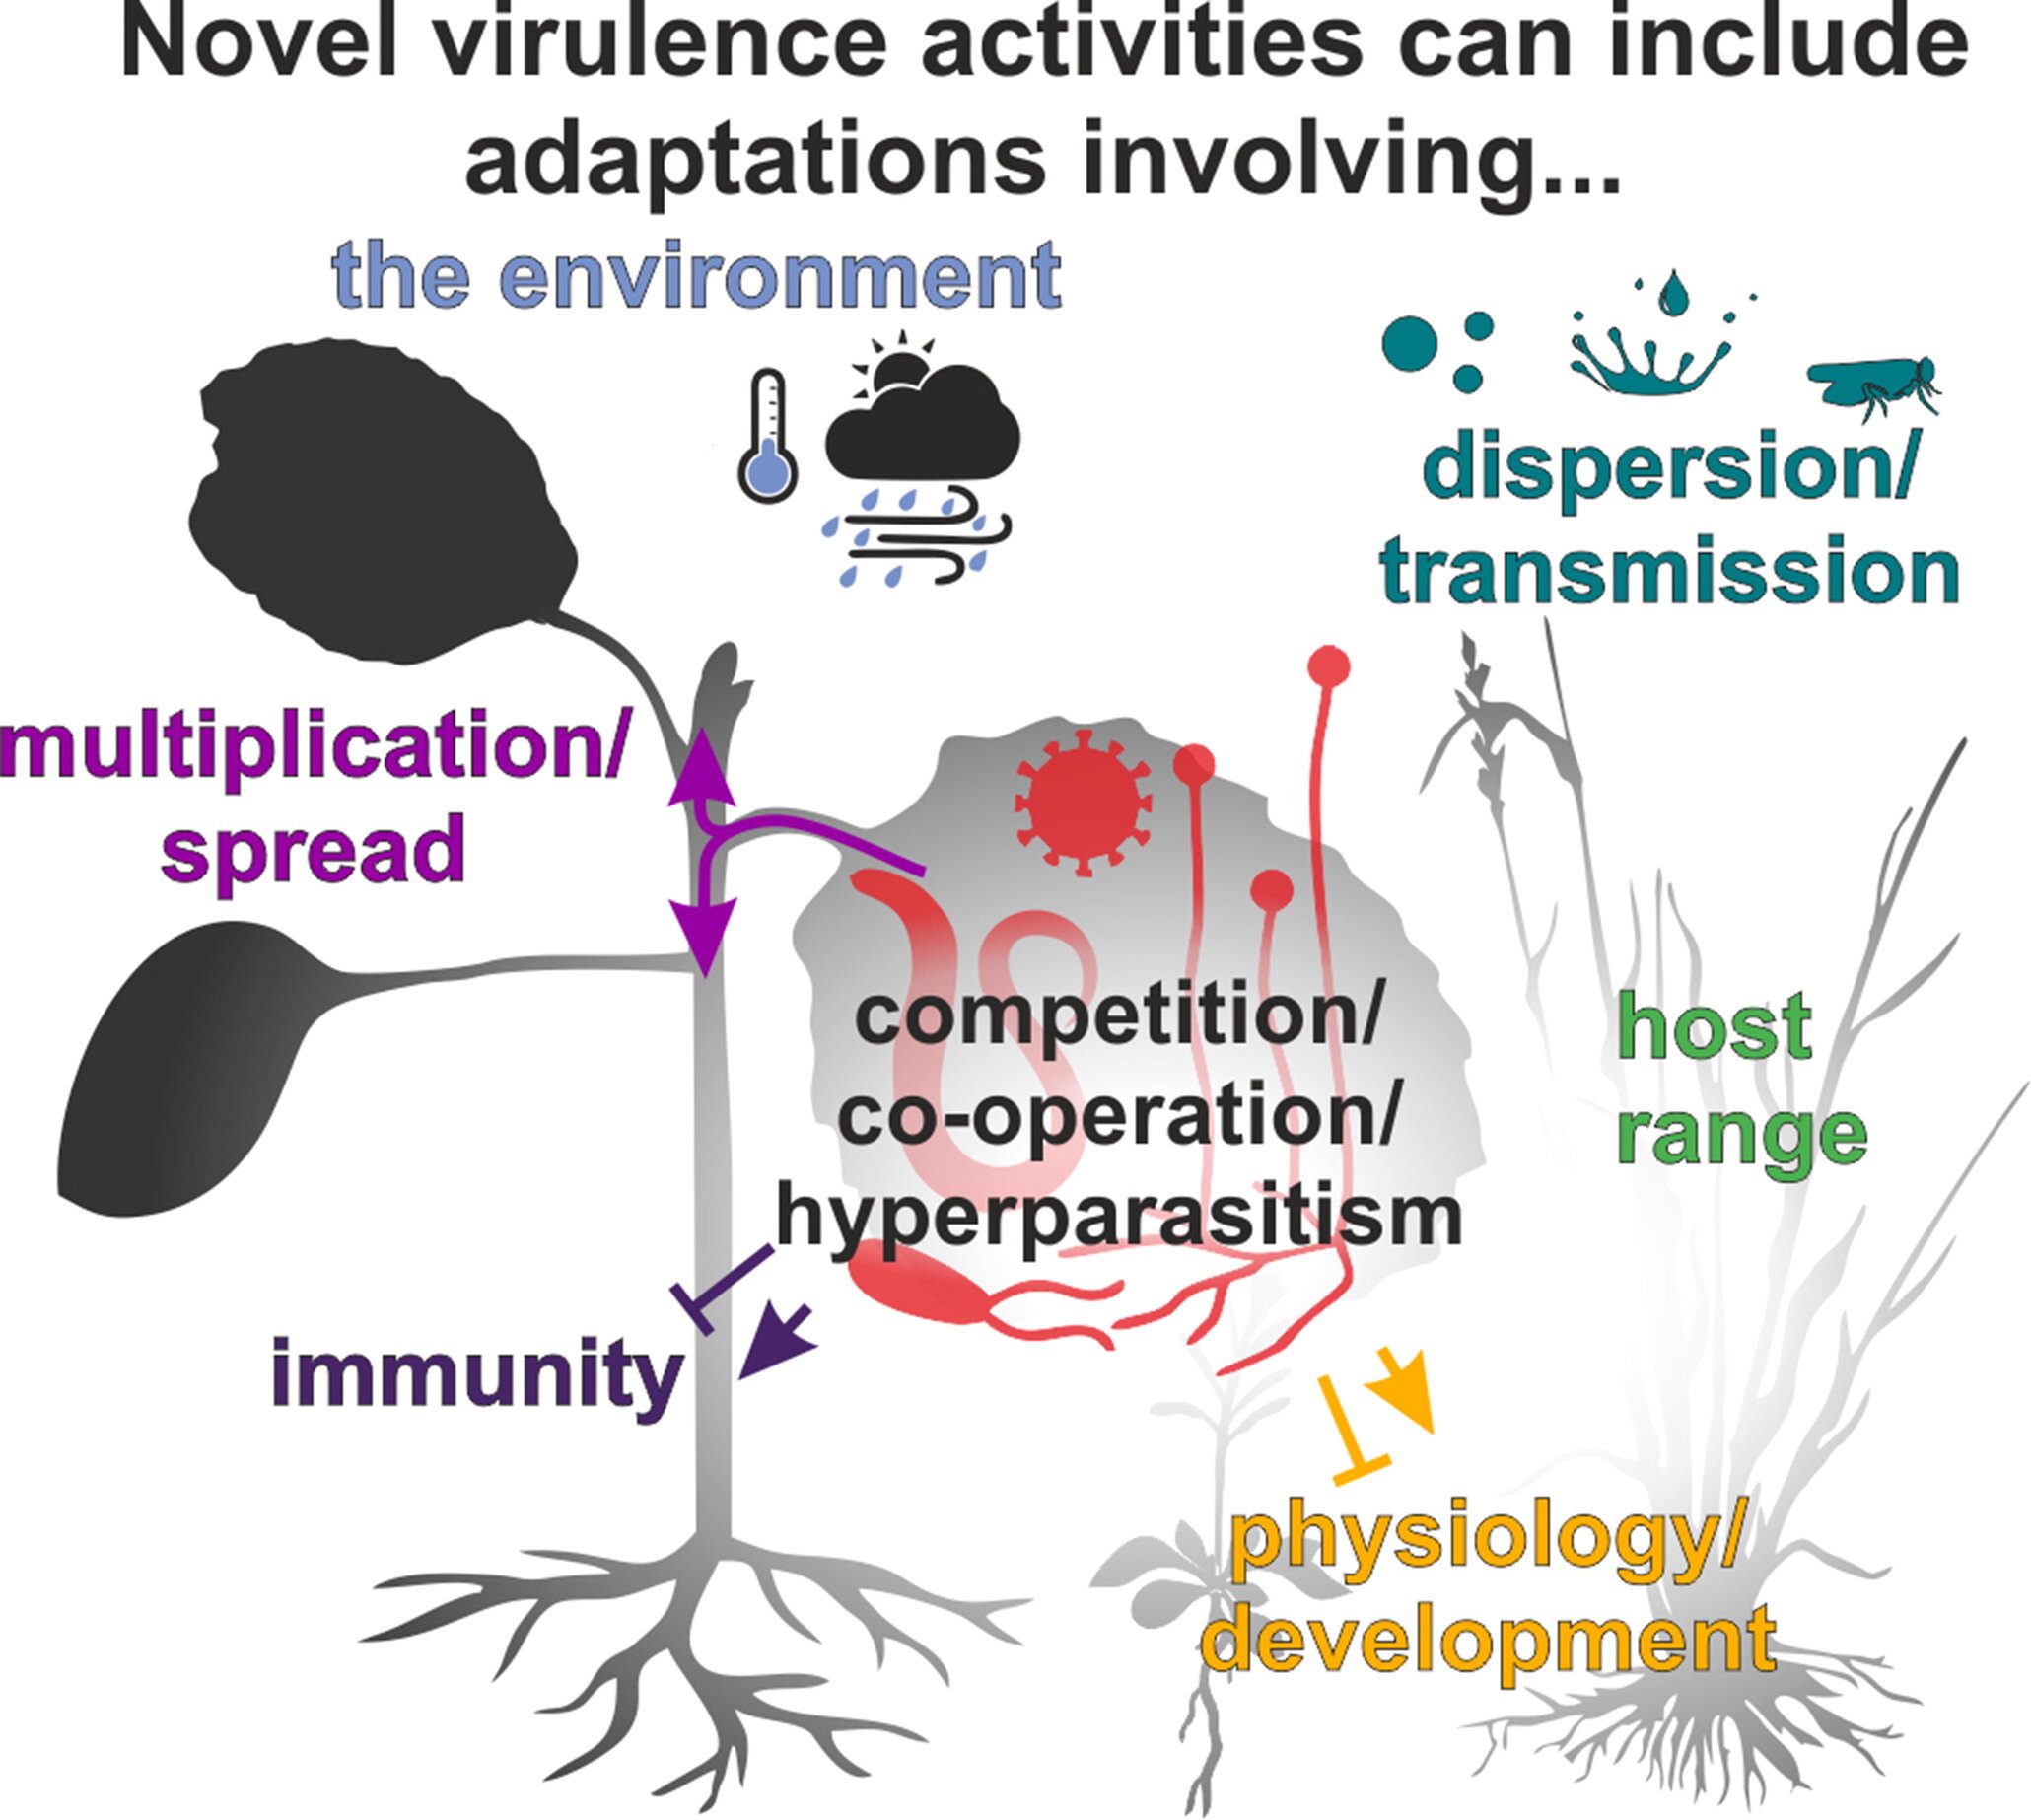 How do pathogens evolve novel virulence activities and why does it matter?